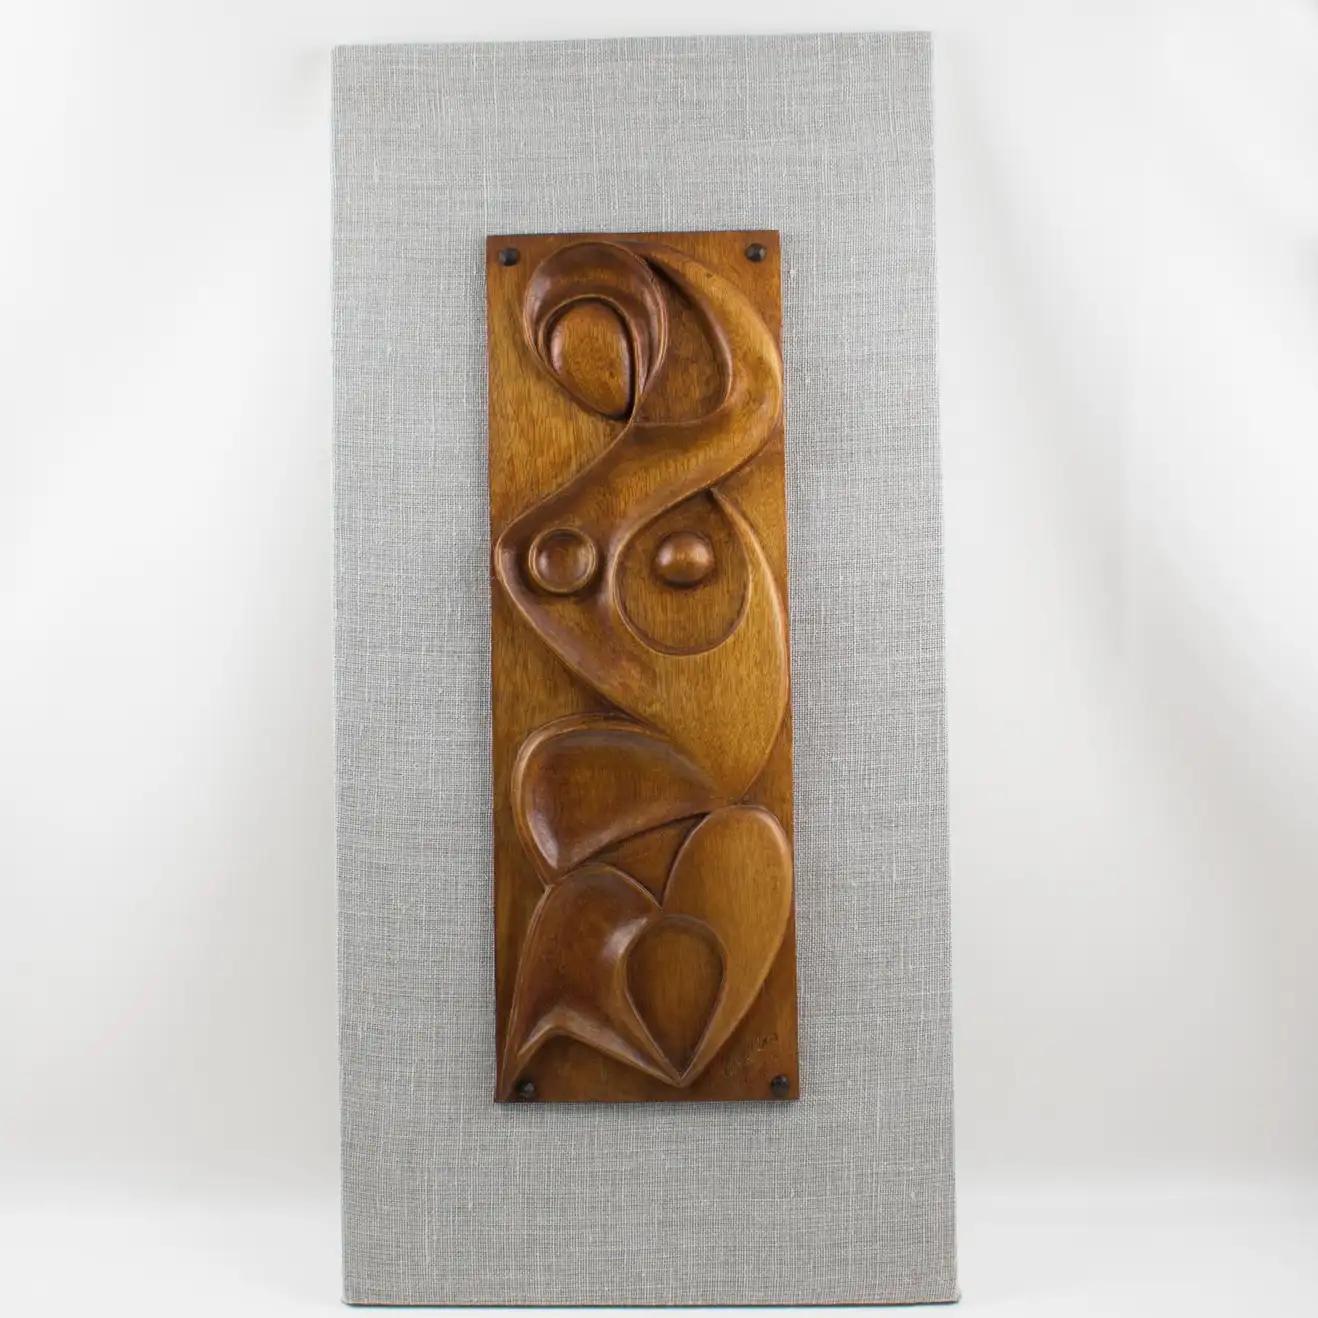 Maxime Tendero Wall-Mounted Abstract Wooden Hand-Carved Art Sculpture Panel 1973 For Sale 10